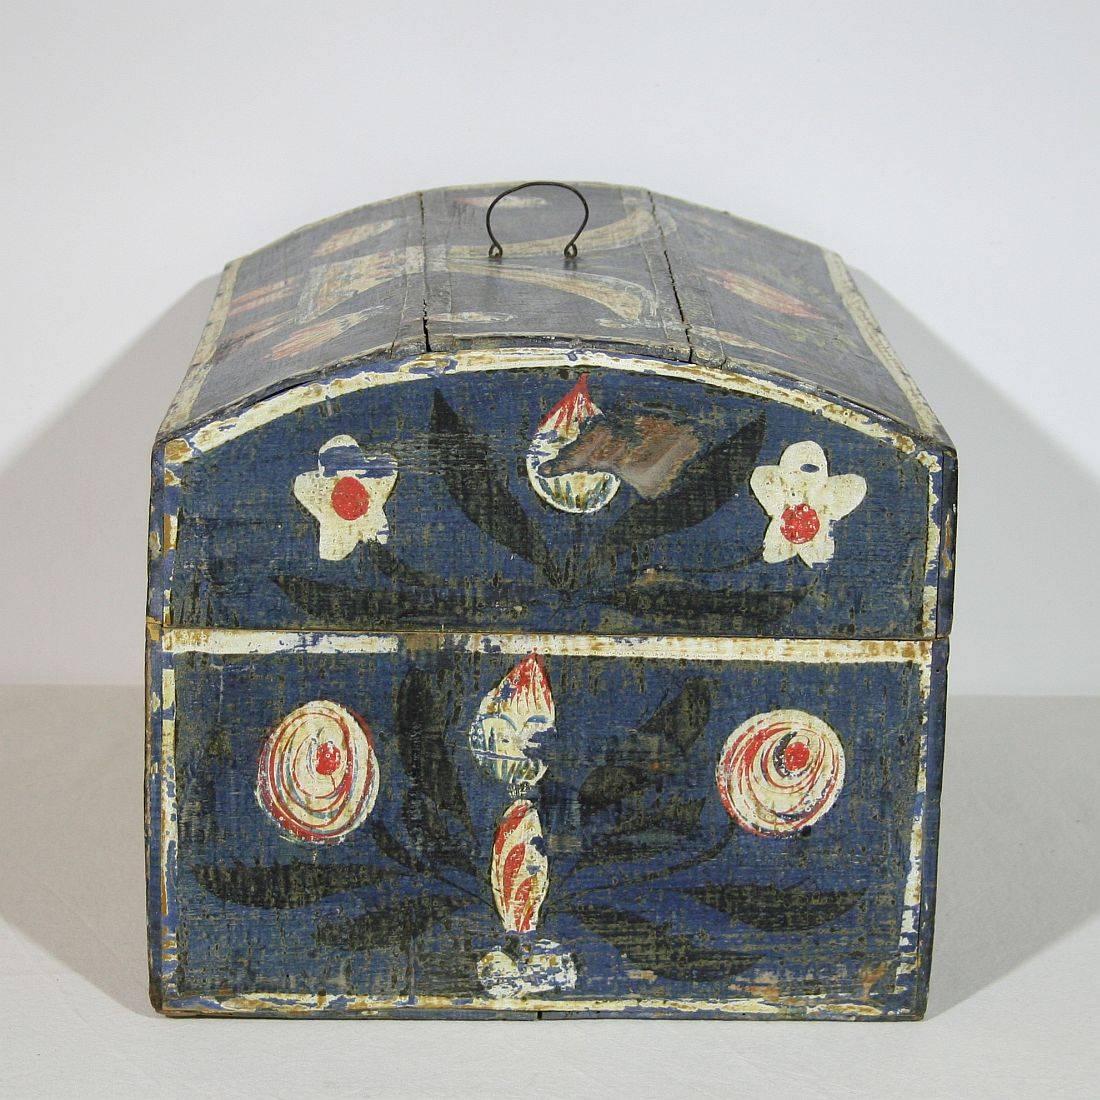 Iron 18th Century French Folk Art Weddingbox from Normandy with Hearts and Bird